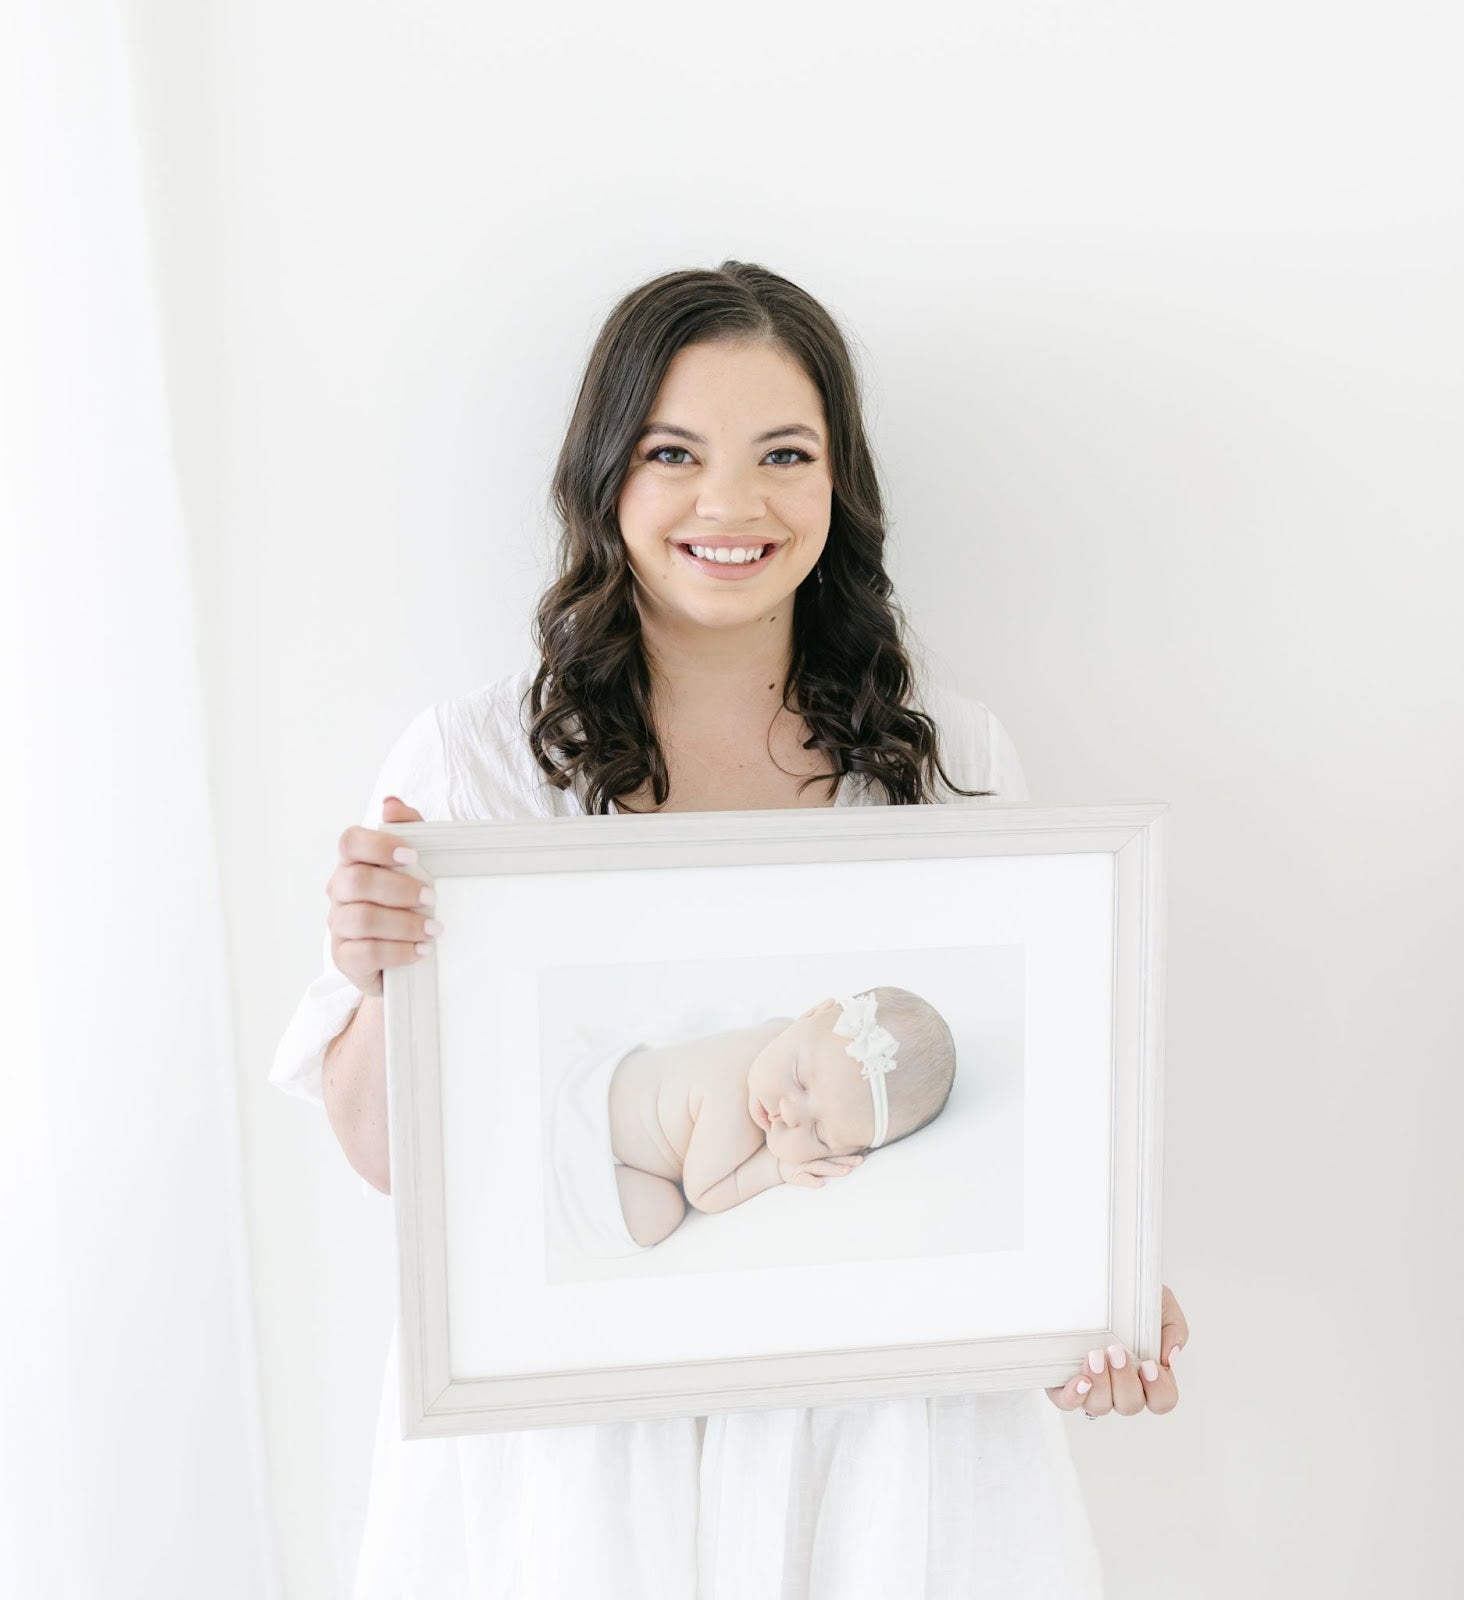 Woman photographer holding a picture of a newborn